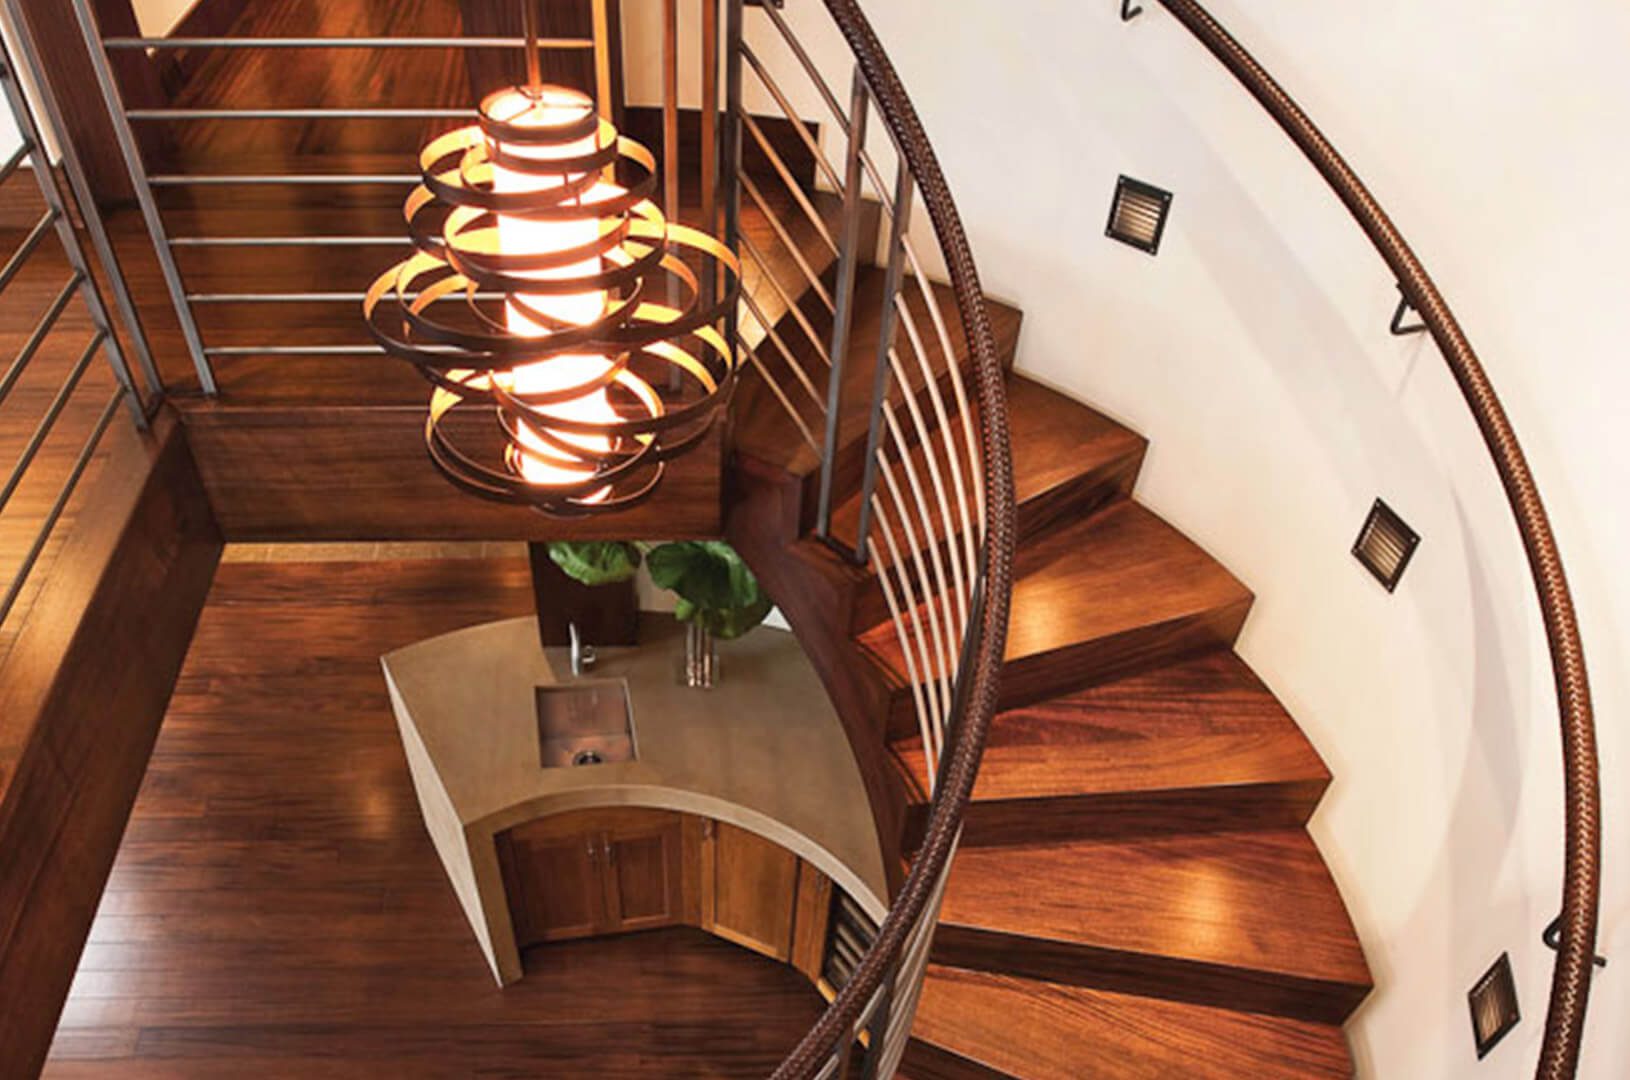 A close-up of a spiral staircase, a wooden floor below, and a chandelier.